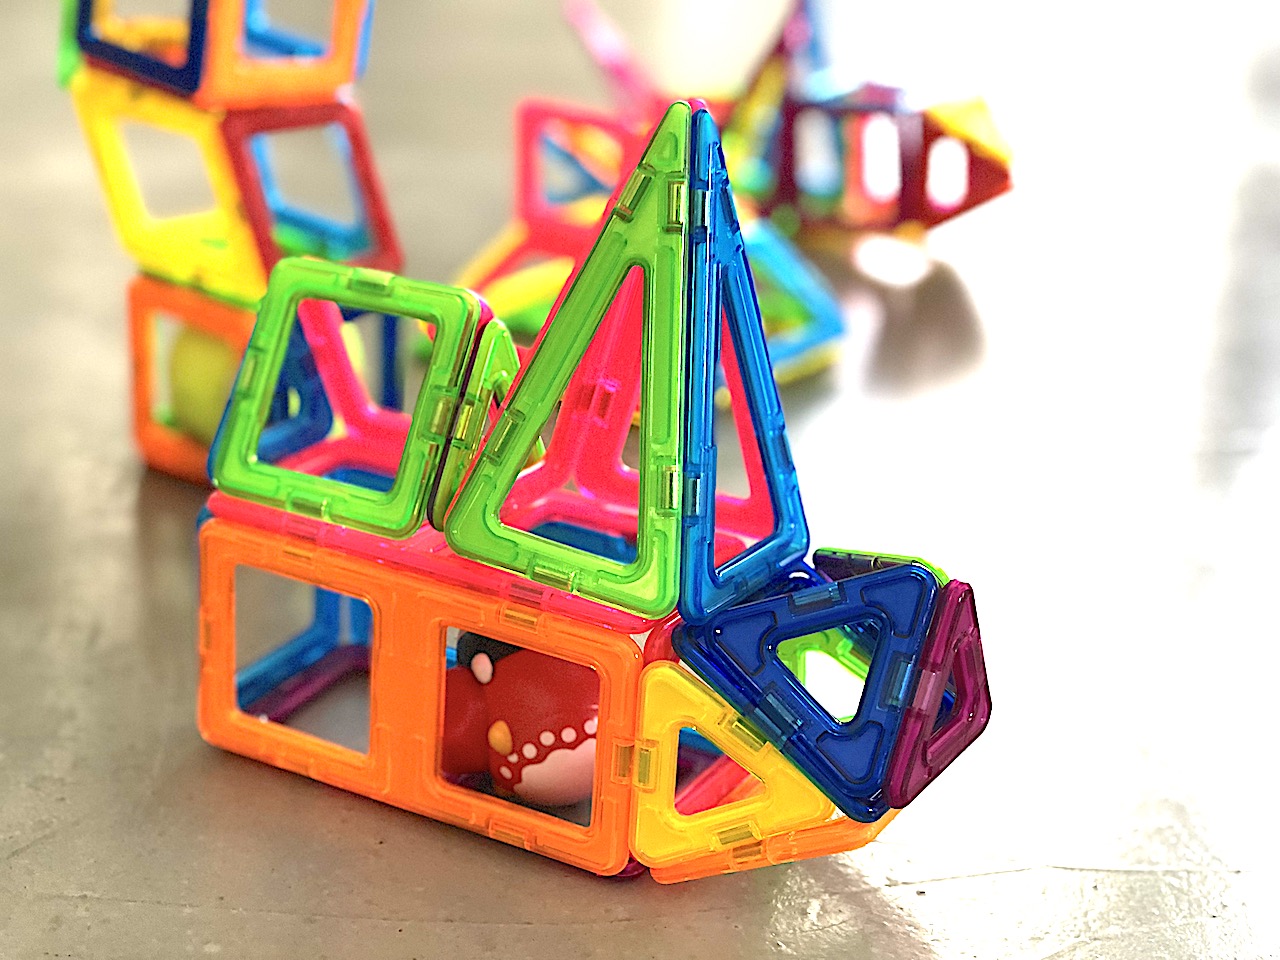 Magformers - Best STEM toy for children of all ages #Magformers #STEM #STEMToys #BestToy #AwardWinning